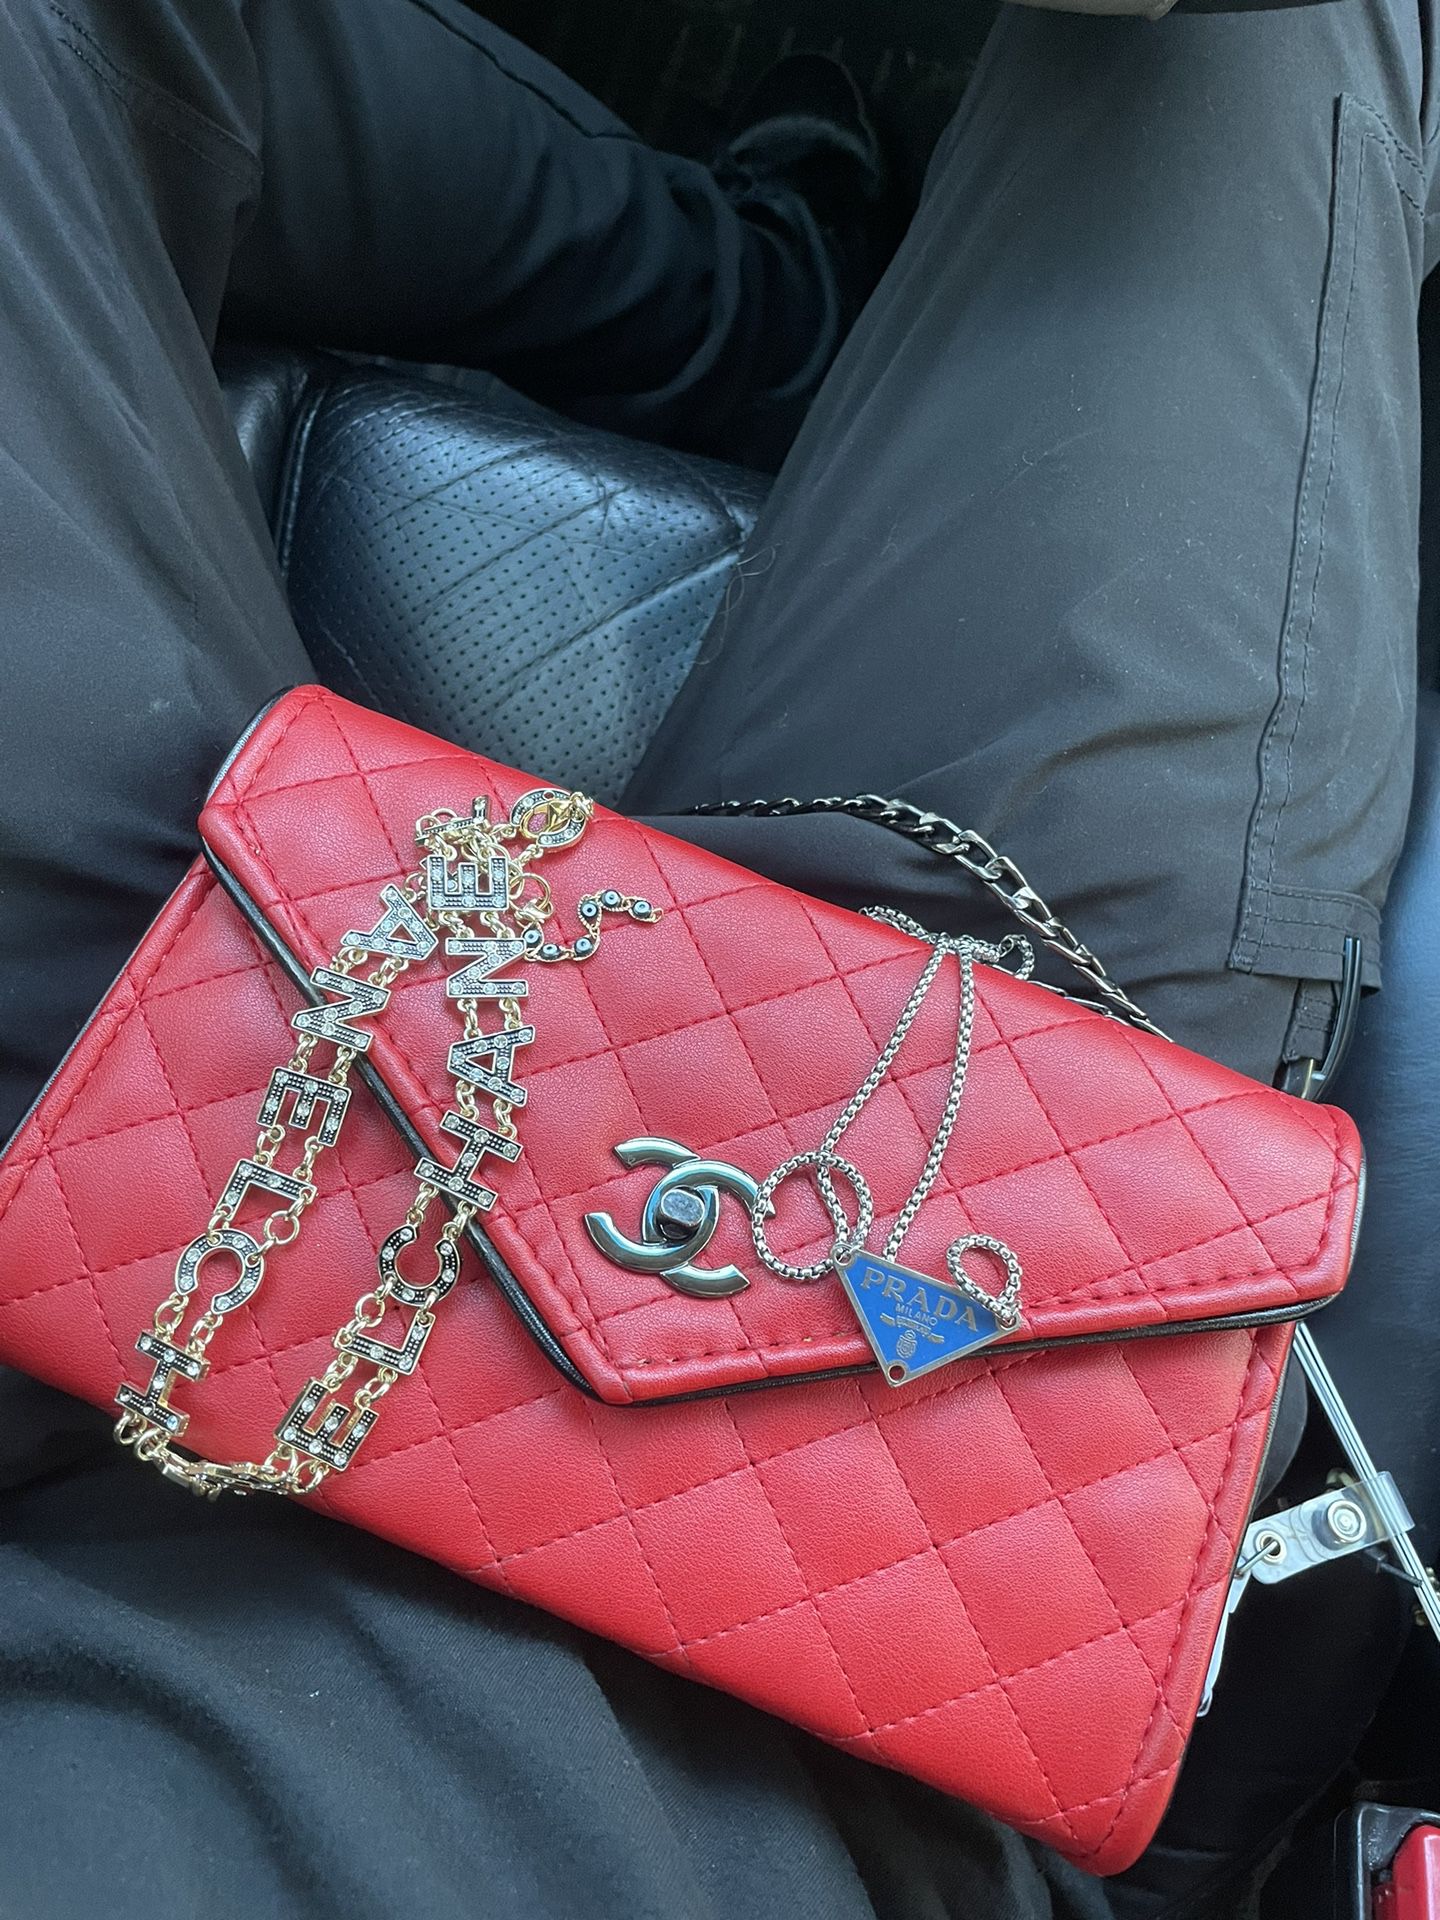 Chanel Bag, Chanel Necklace, and Prada Necklace